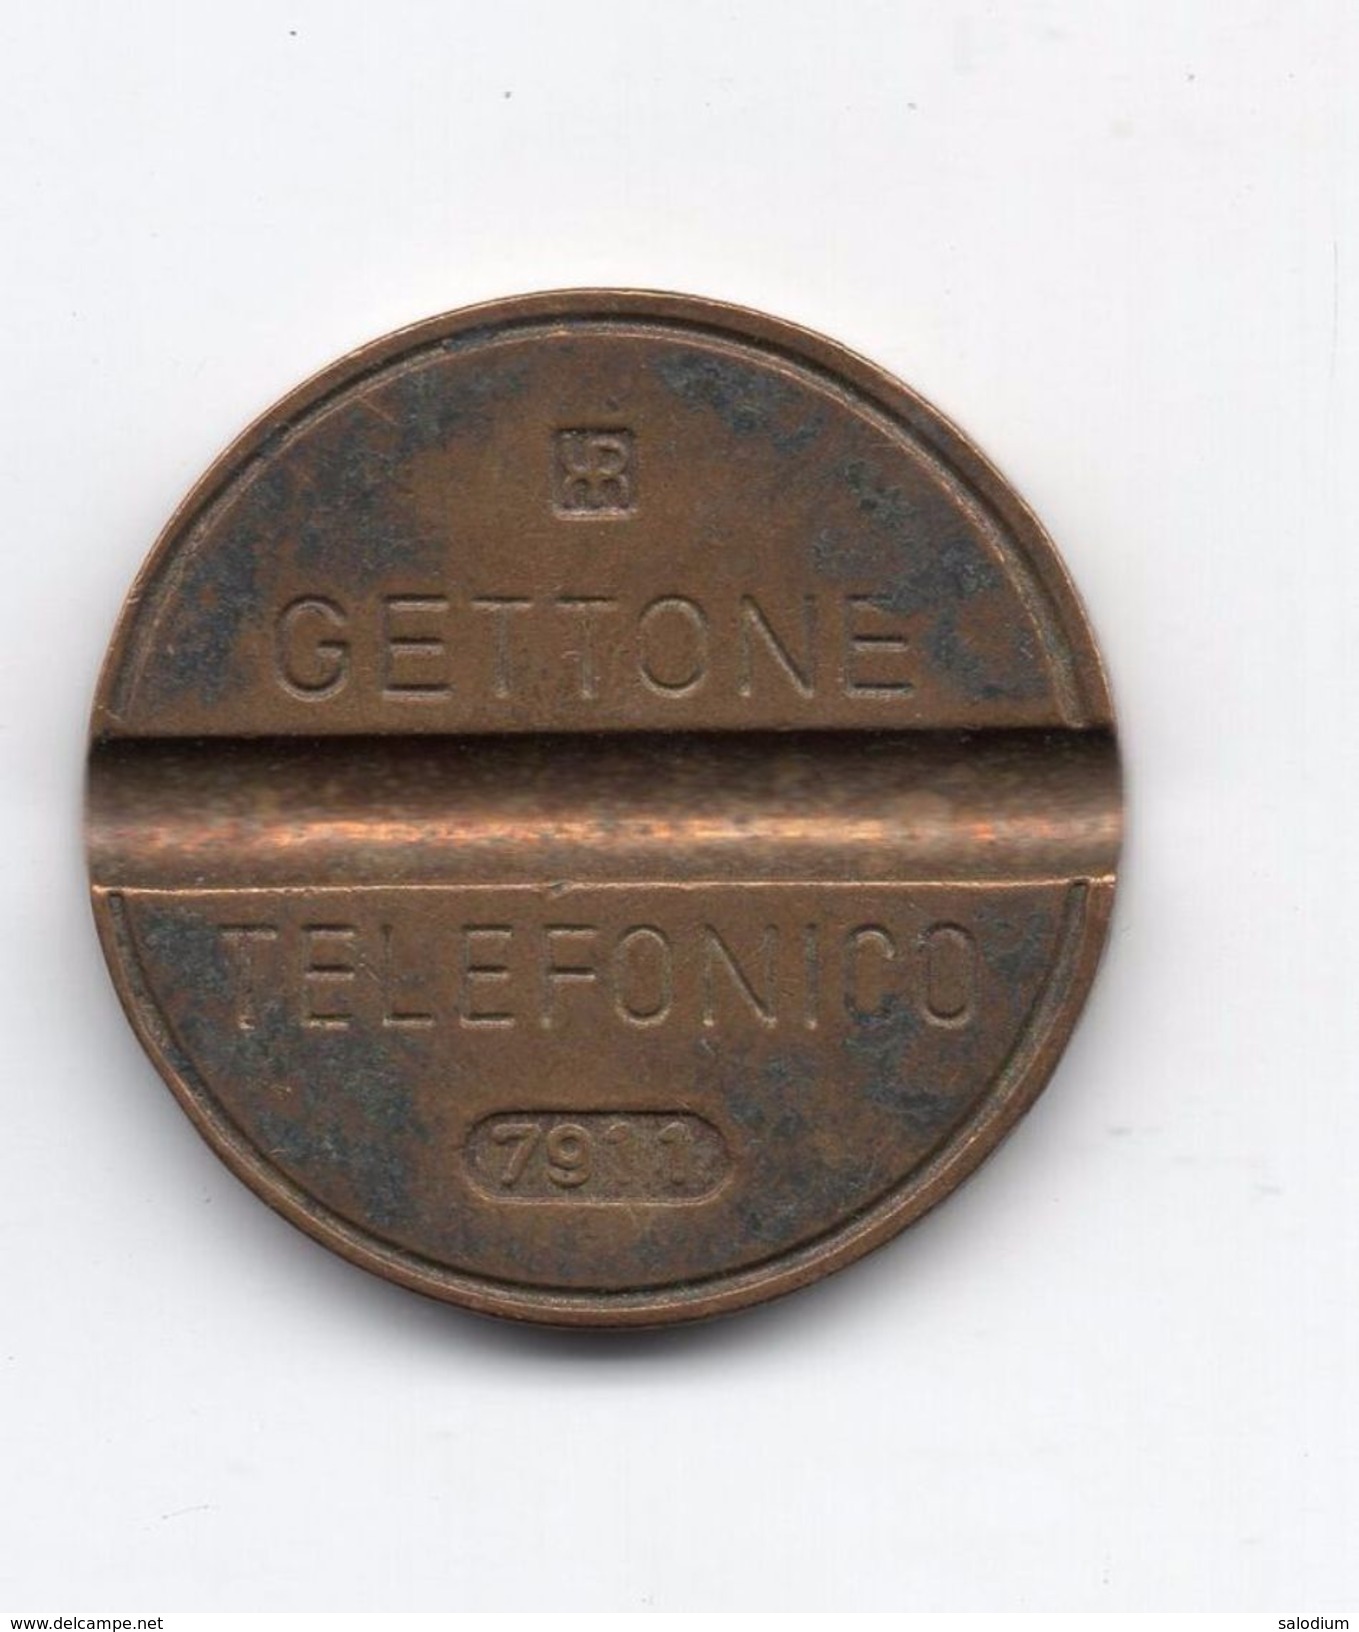 Gettone Telefonico 7911 Token Telephone - (Id-691) - Professionals/Firms